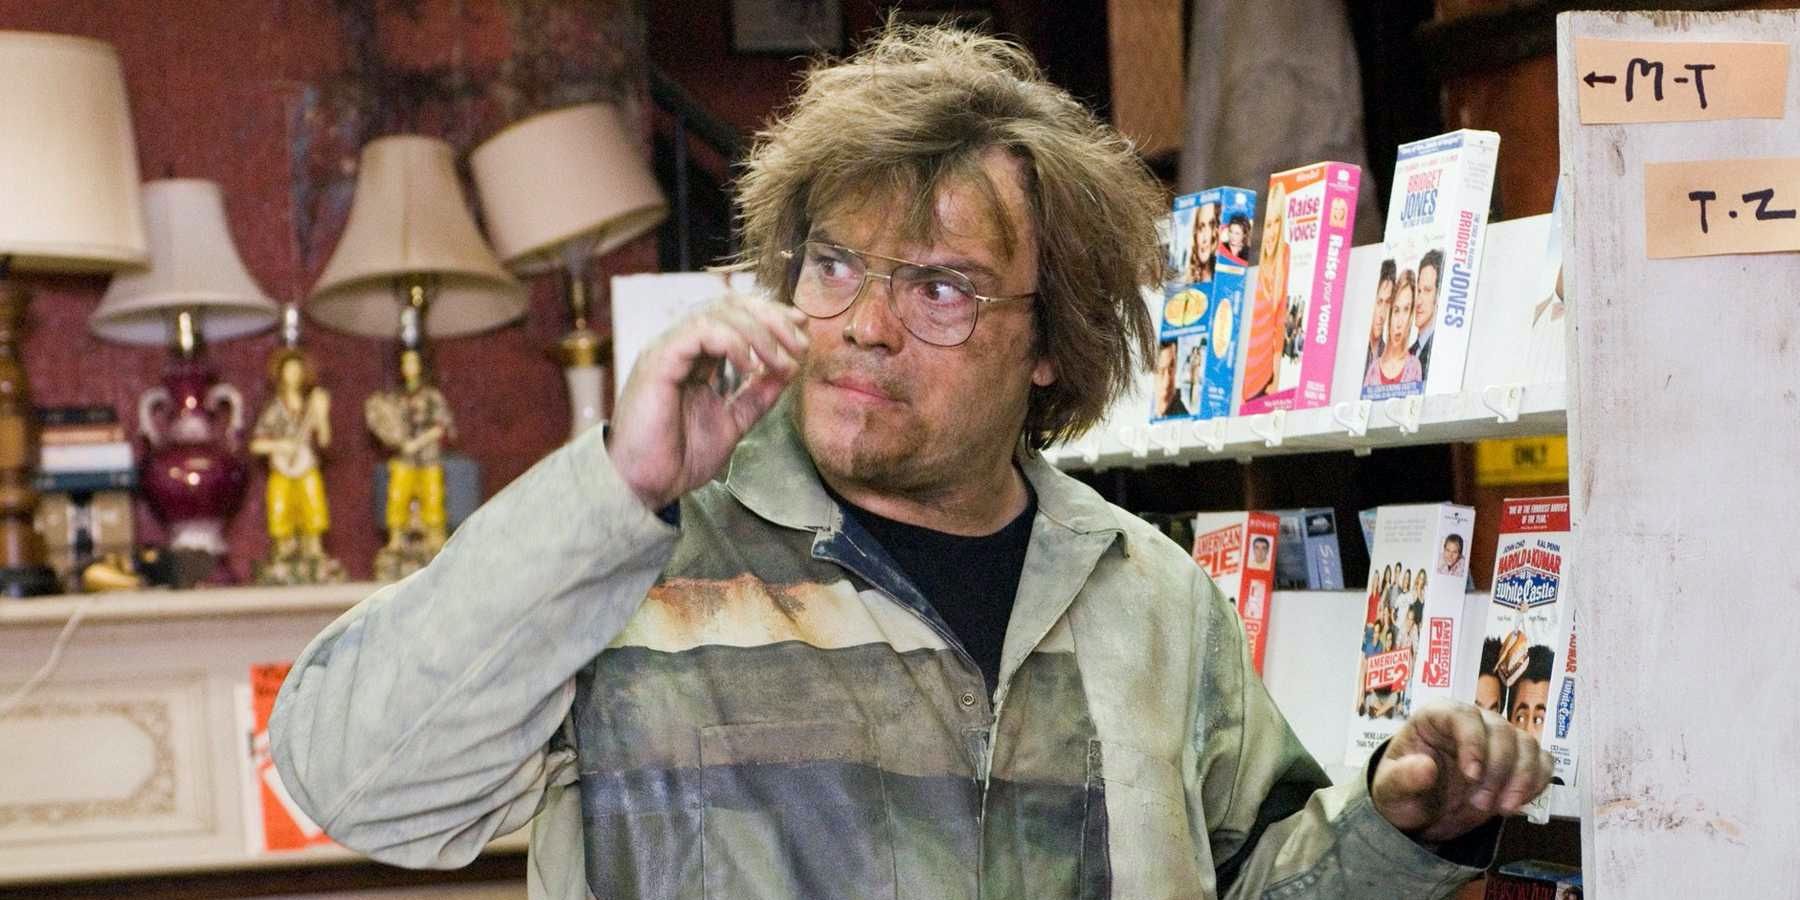 10 Interesting Facts & Trivia You Didnt Know About Jack Black